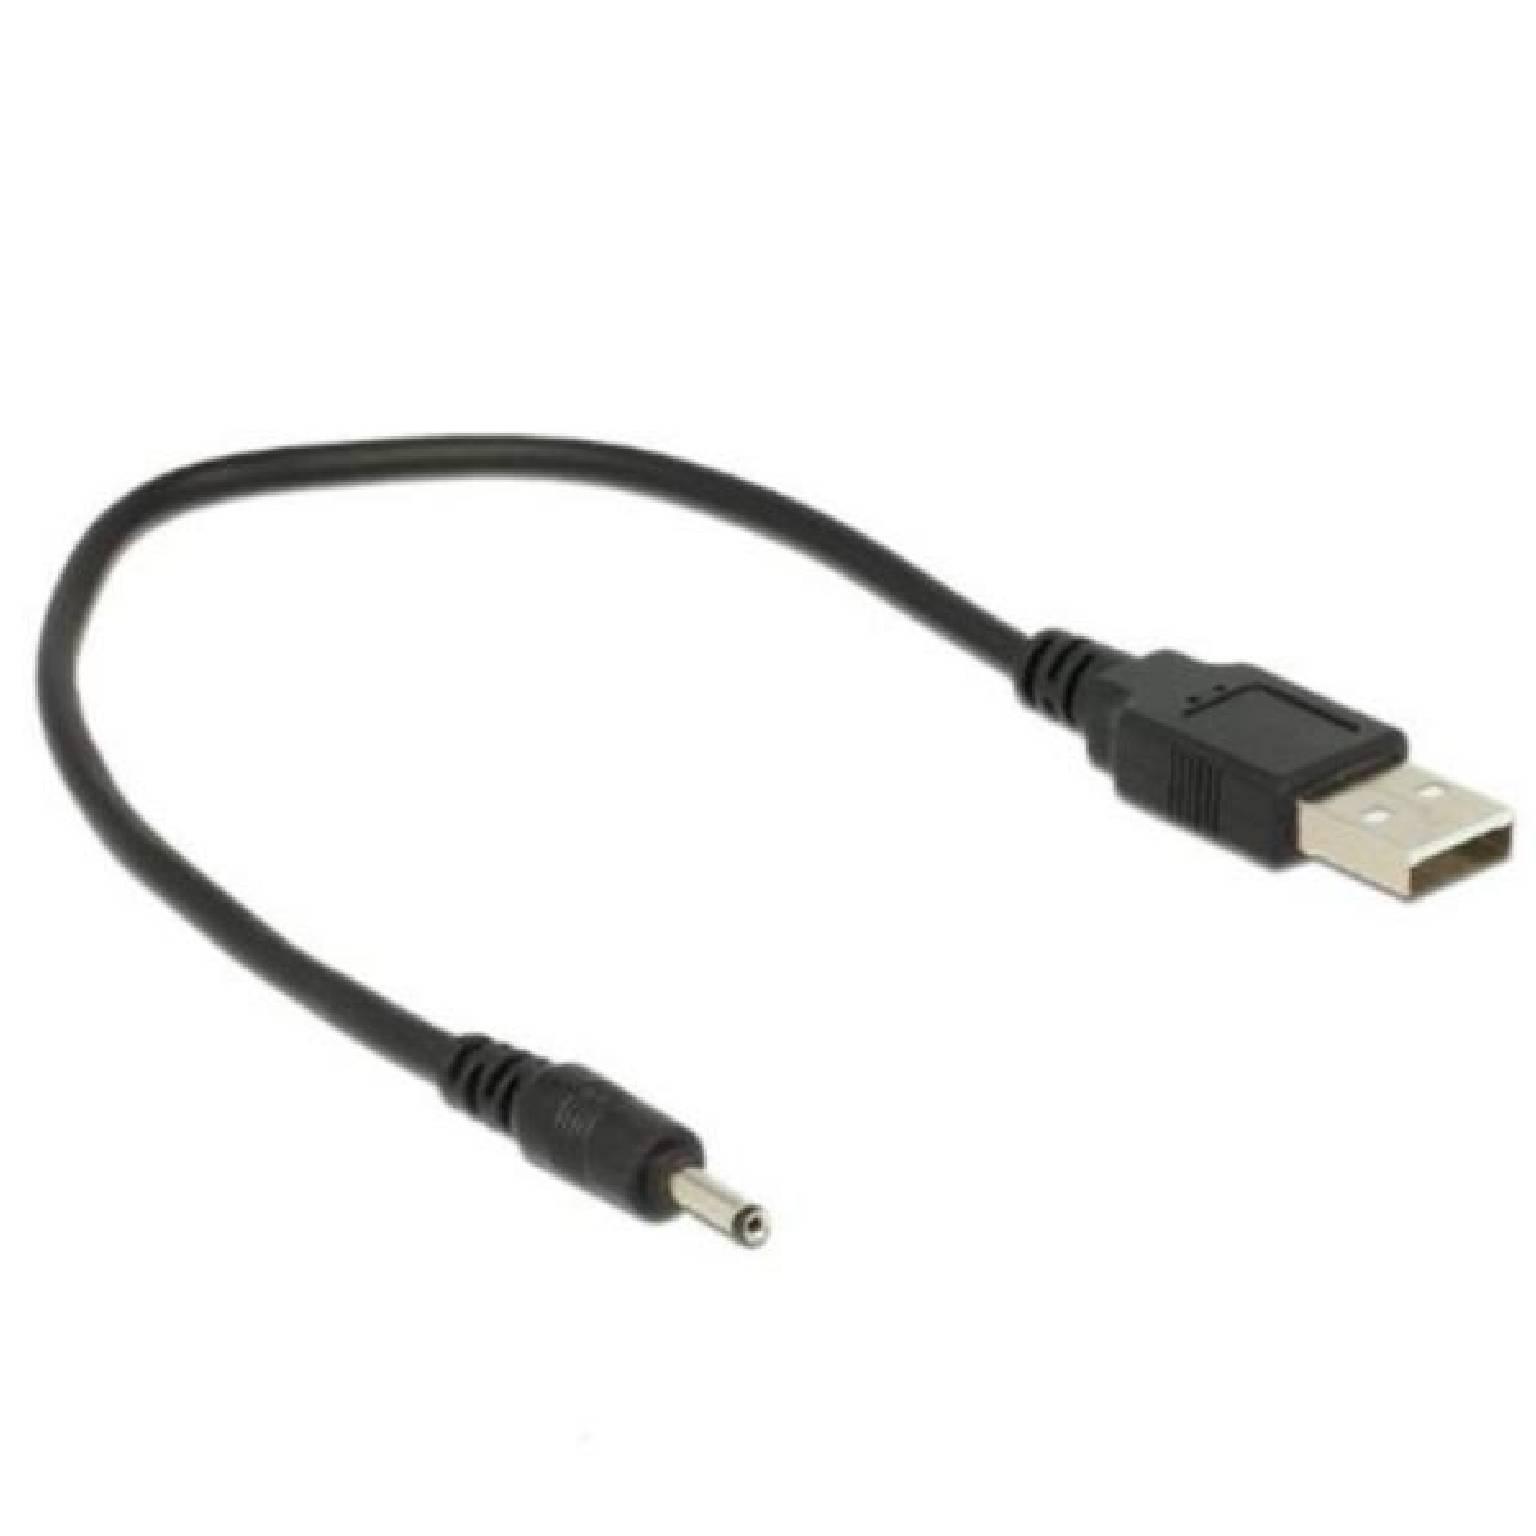 Delock Cable USB Typ-A Stecker Power > DC 3.0 x 1.1 mm Stecker 27